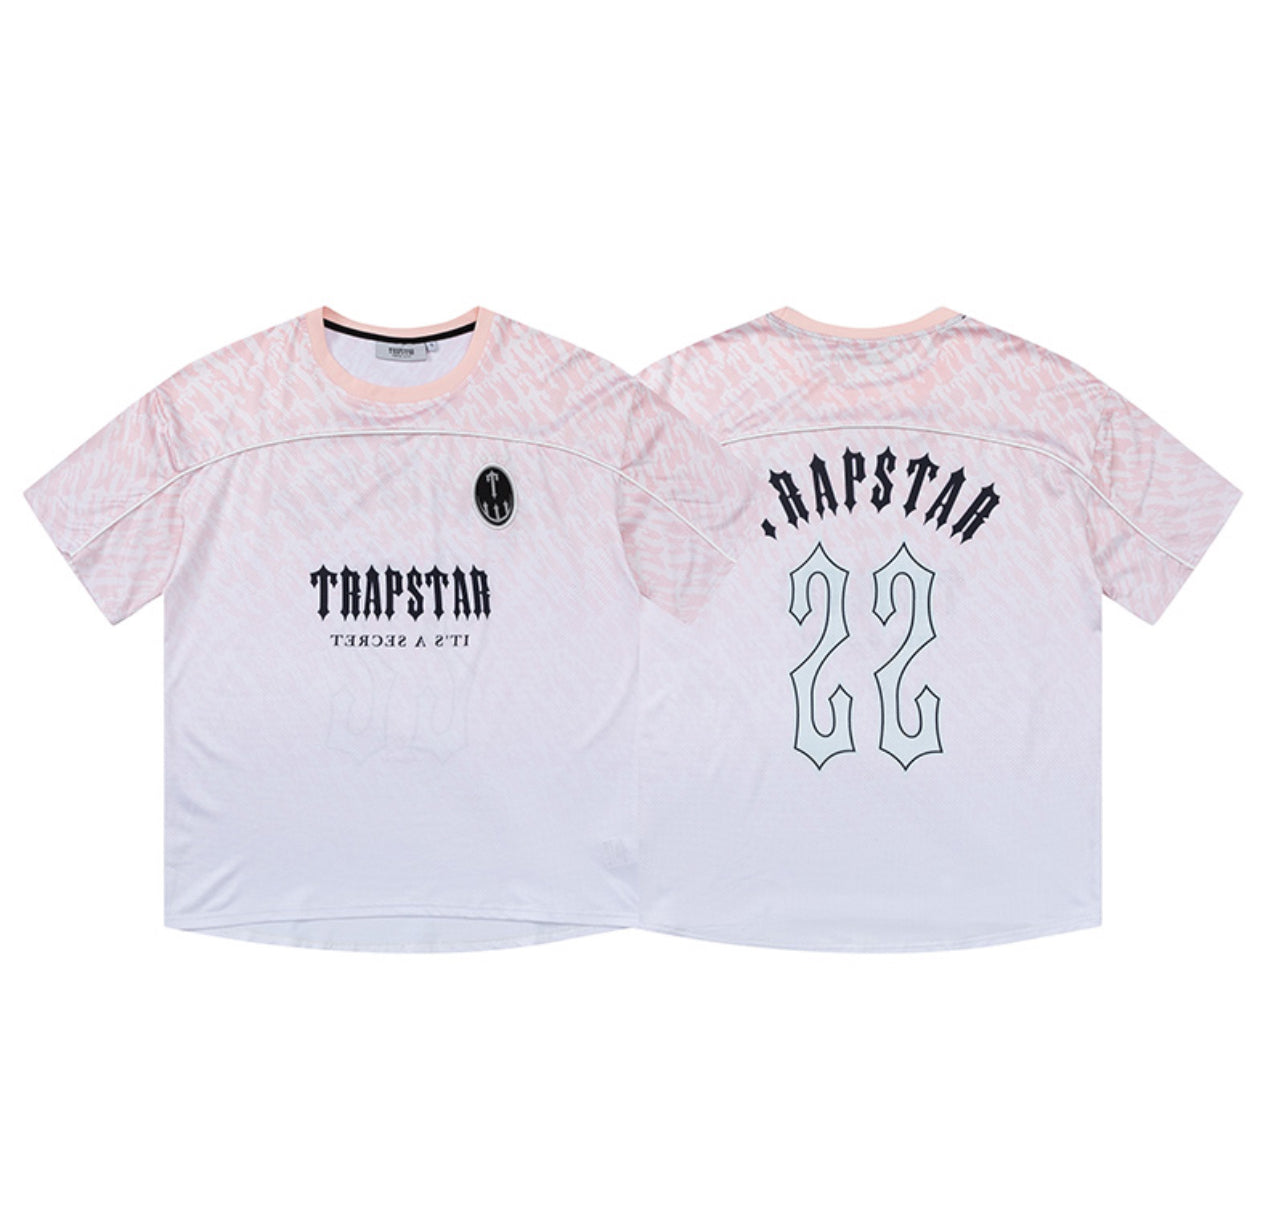 Trapstar Jersey T-Shirt Collections